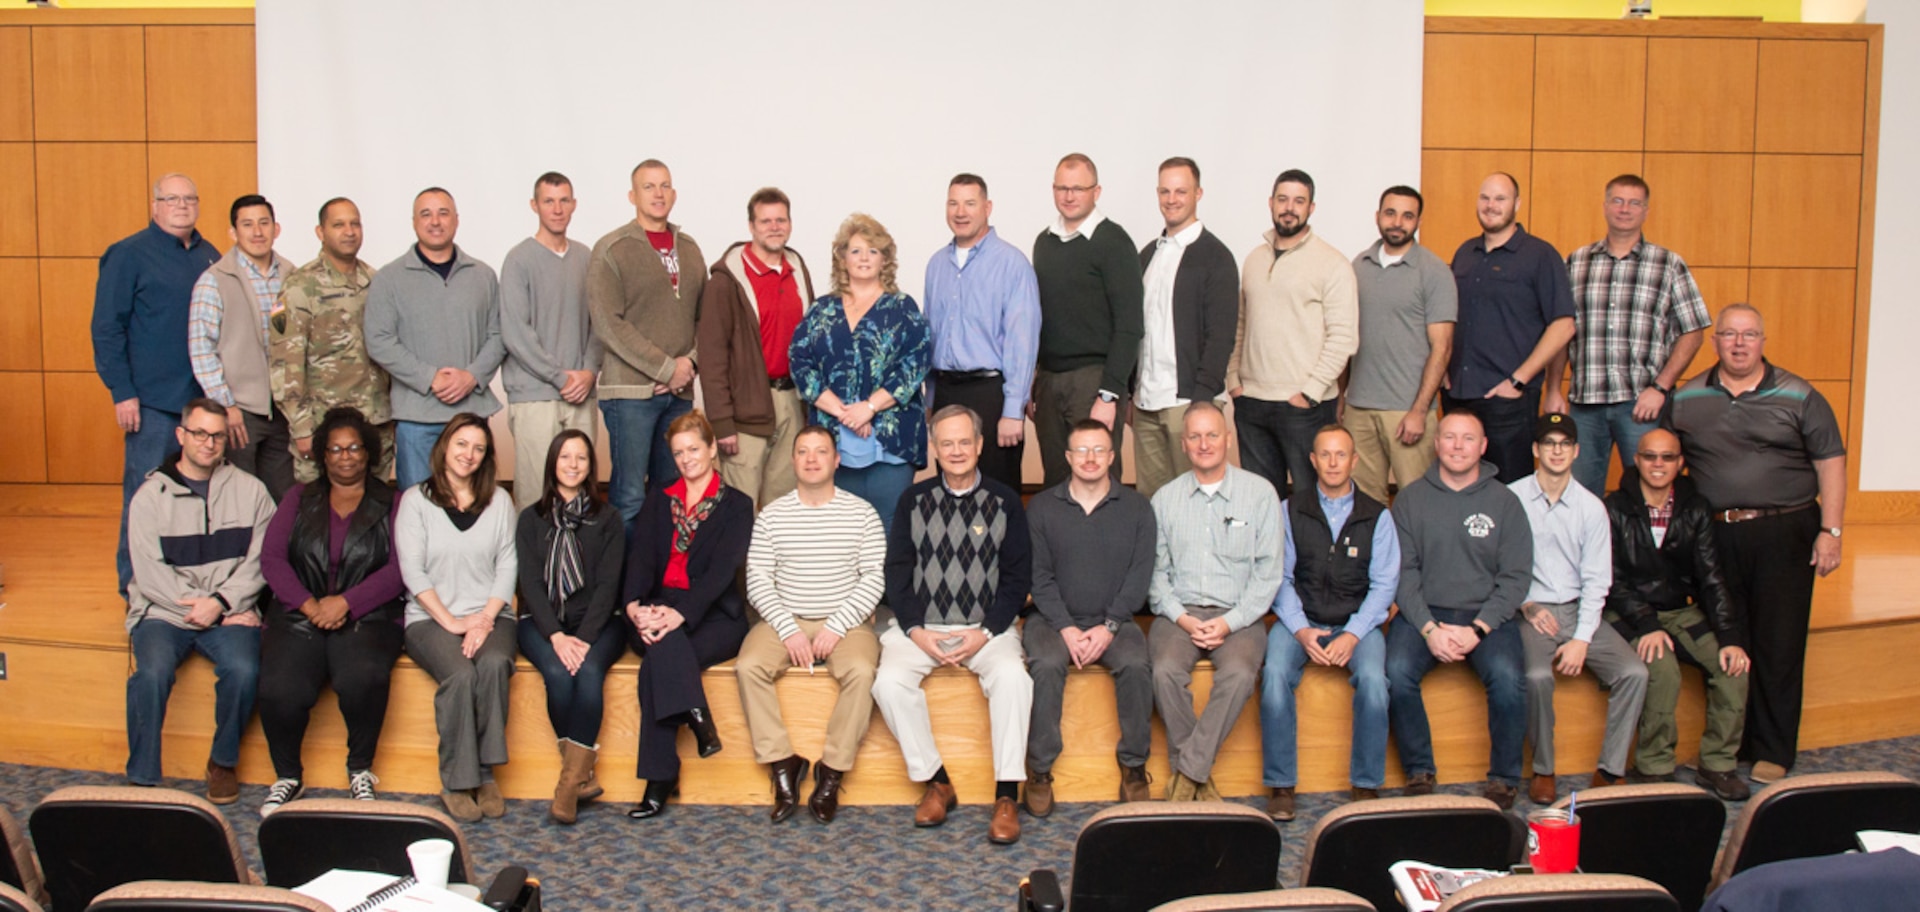 Students of the State Contract Management/Business Manager’s Certification Construction Facilities Maintenance Office (CFMO) 102 course pose for a group photo at Camp Dawson, Kingwood, W.Va., Dec. 6, 2018. Students from around the U.S. participated in the course which provided students a deep-dive into contracting topics such as liability claims, bonding and insurance, contract terminations, contractor claims, delays and remedies, payments and closeout, and ethics.